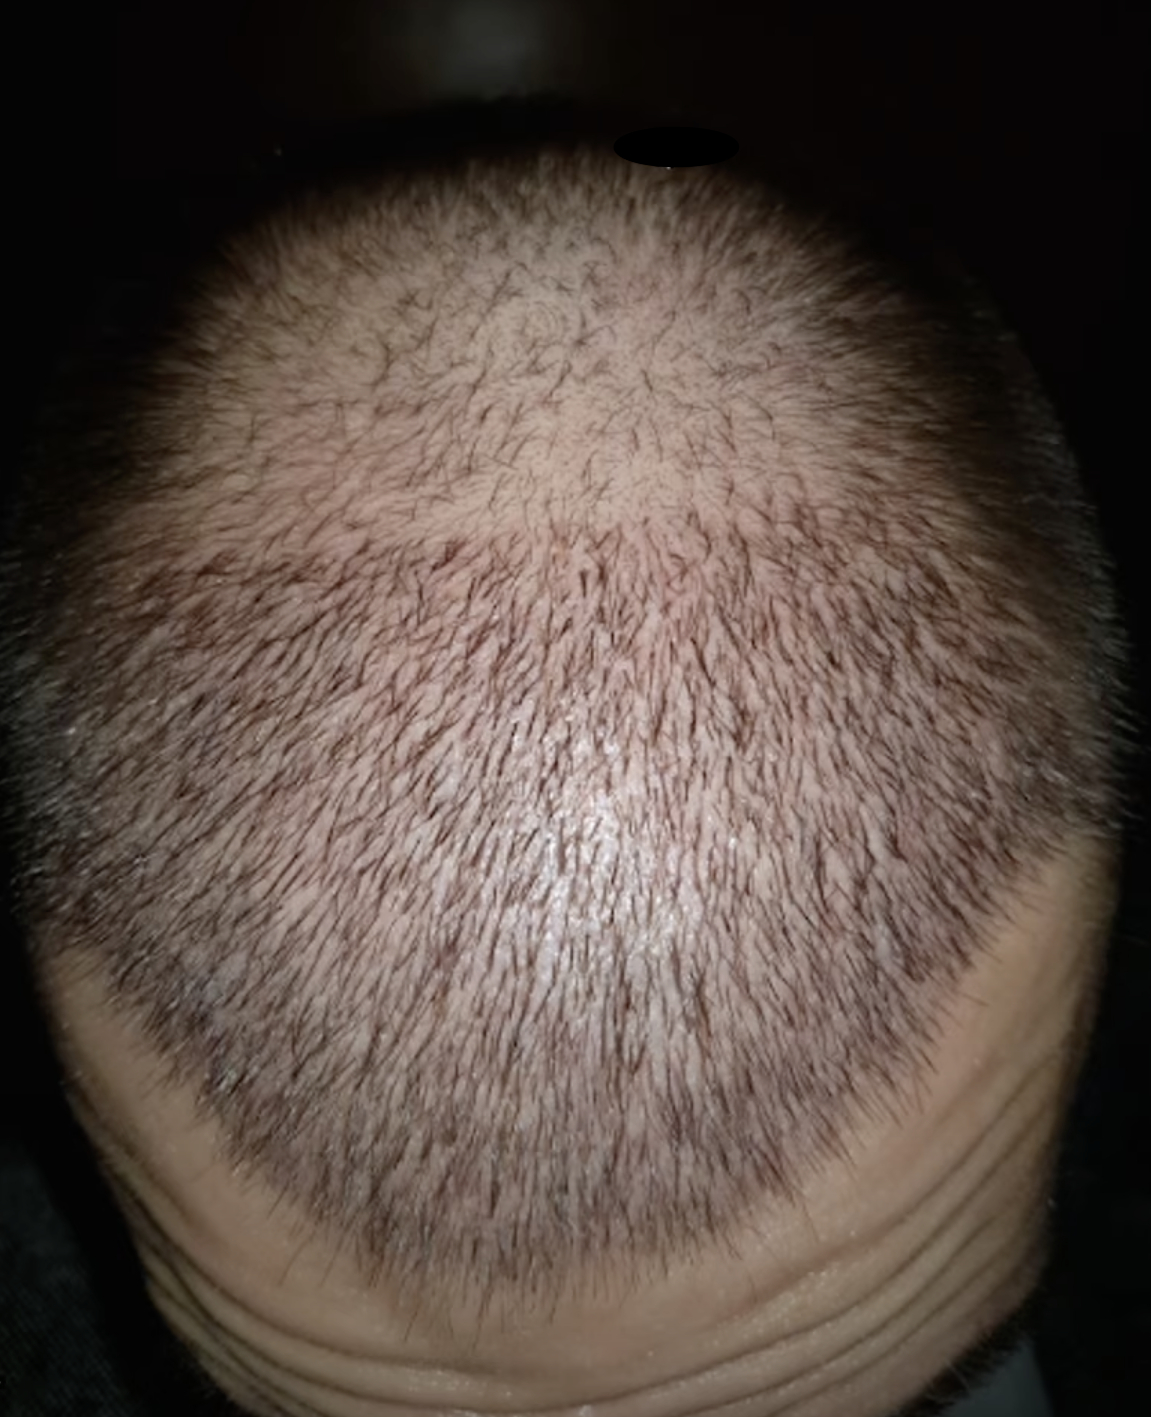 Day 20 after FUE transplant